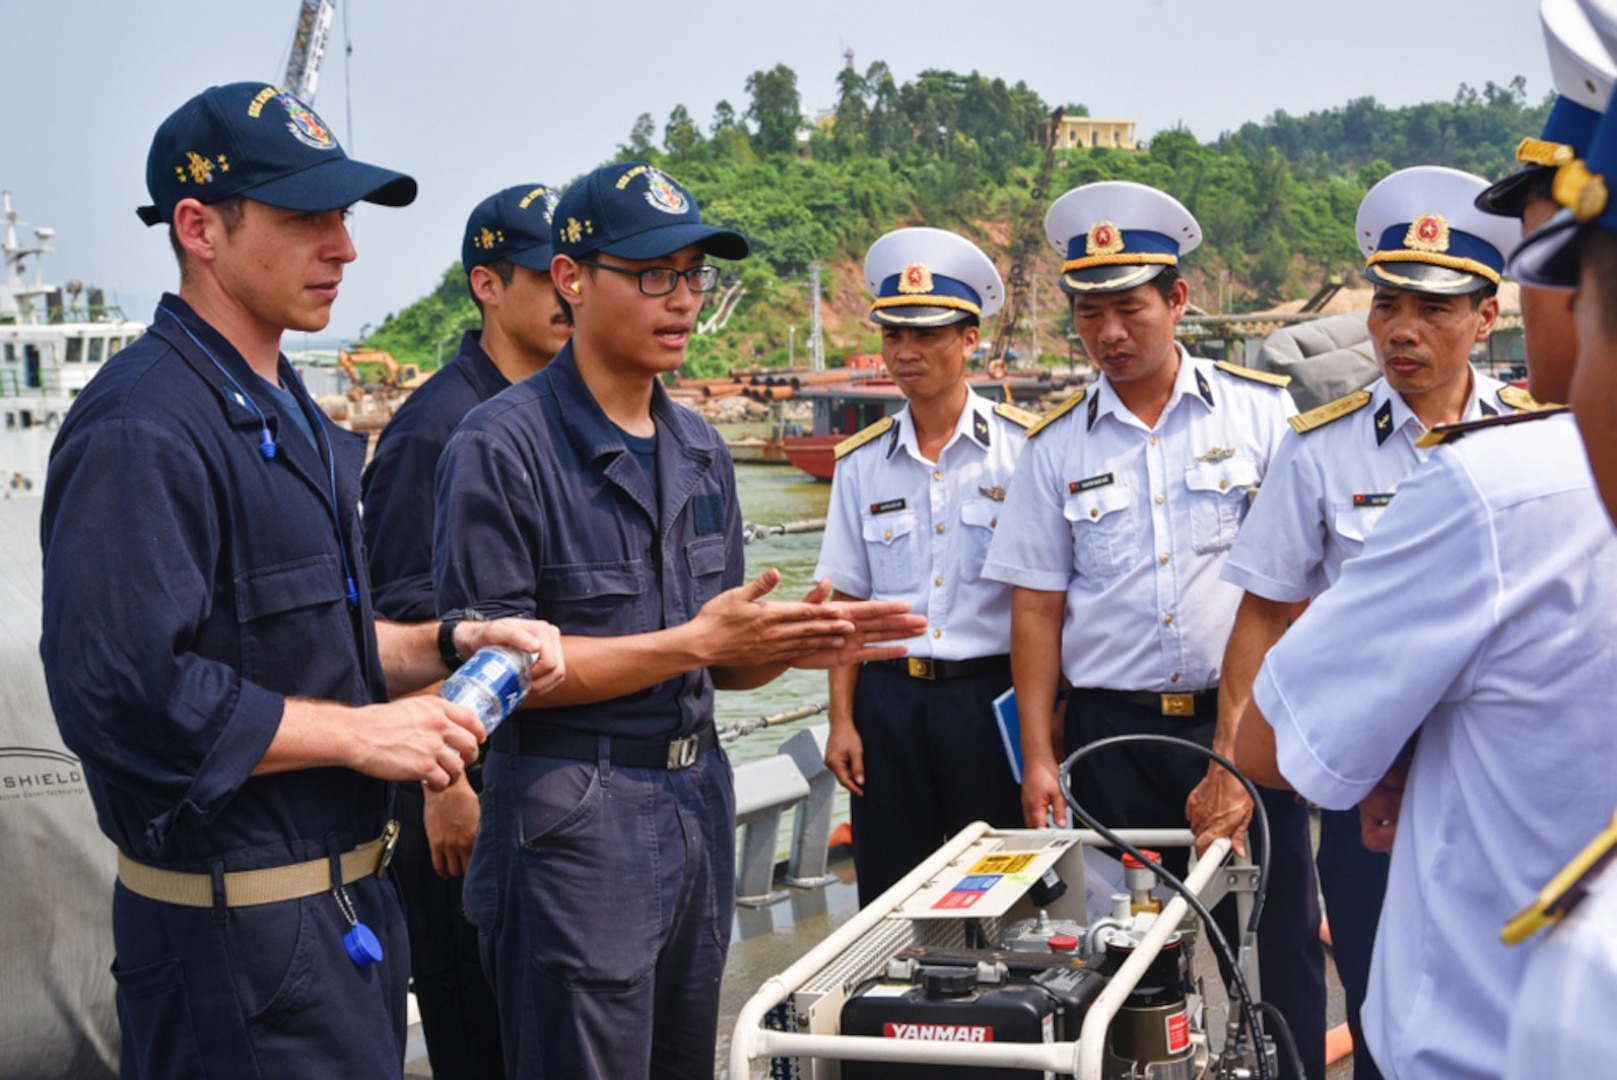 Sailors from the Arleigh-Burke class guided-missile destroyer USS John S. McCain (DDG 56) participate in a damage control professional exchange and practical with sailors from Vietnam People’s navy during Naval Engagement Activity (NEA) Vietnam Oct. 2, 2016. In its seventh year, NEA Vietnam is designed to foster mutual understanding, build confidence in the maritime domain and strengthen relationships between the U.S. Navy, Vietnam People's Navy and the local community.